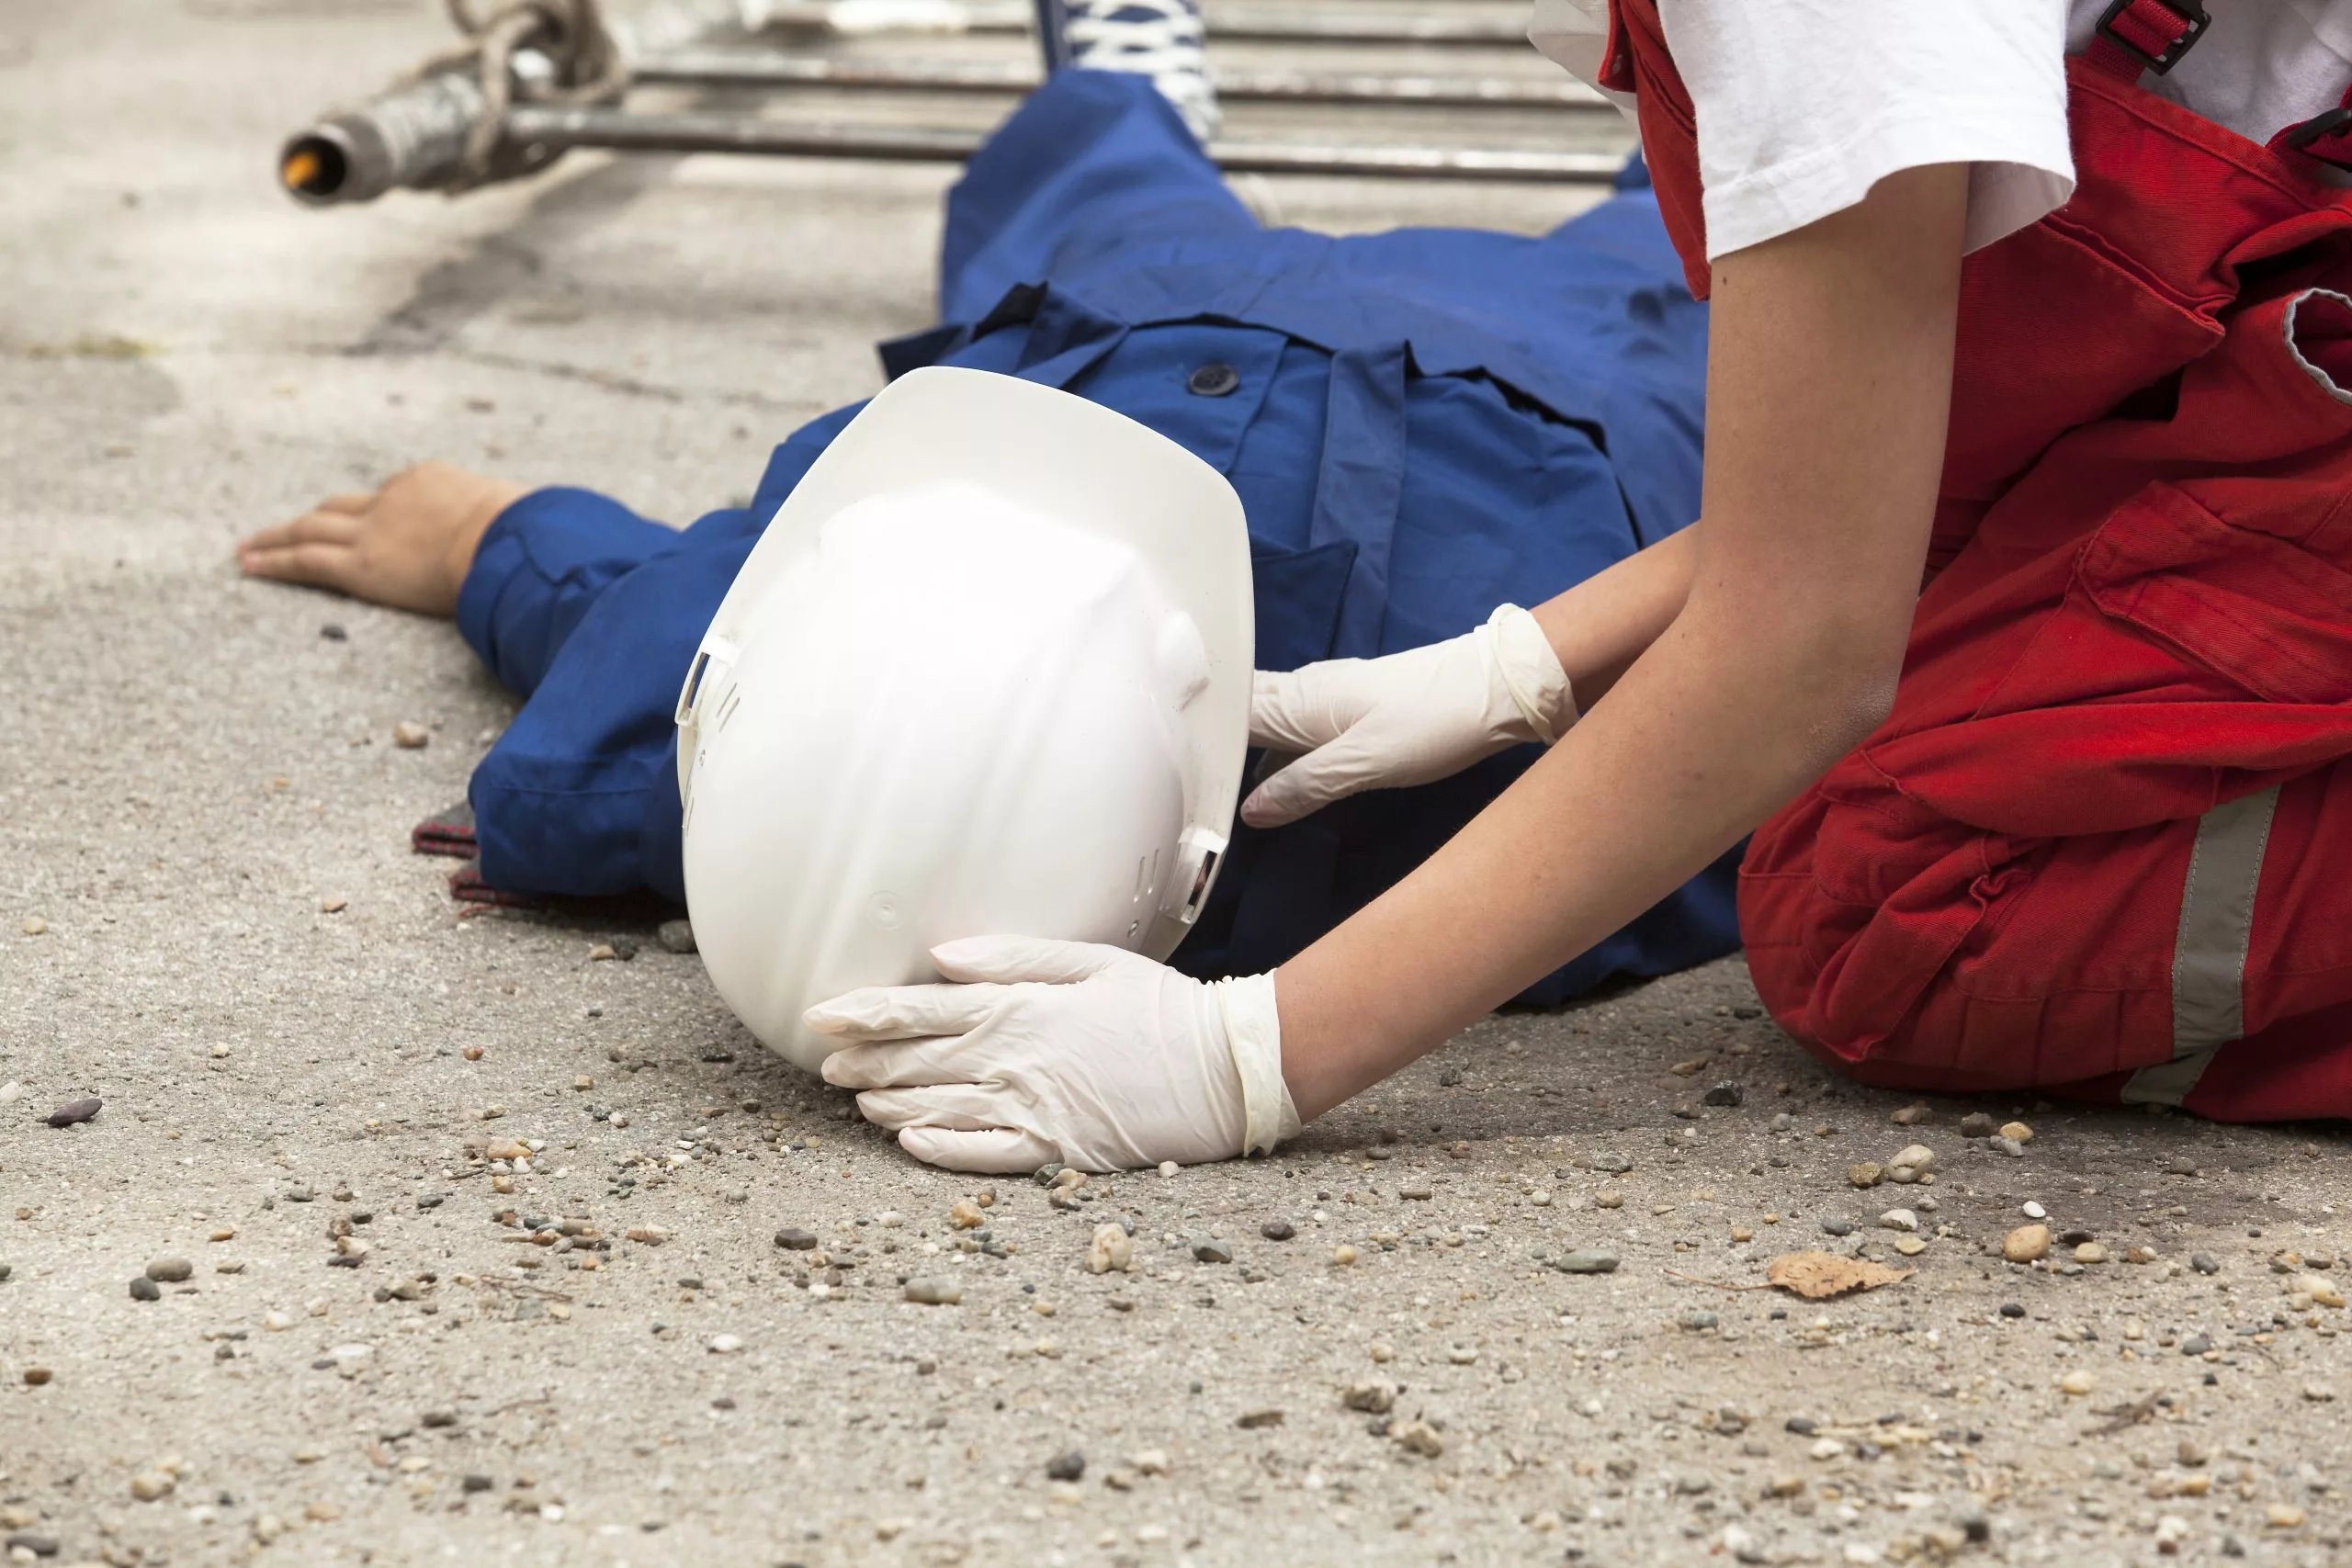 Injury and illness reporting is important to ensure proper attention is paid to safety in the workplace.